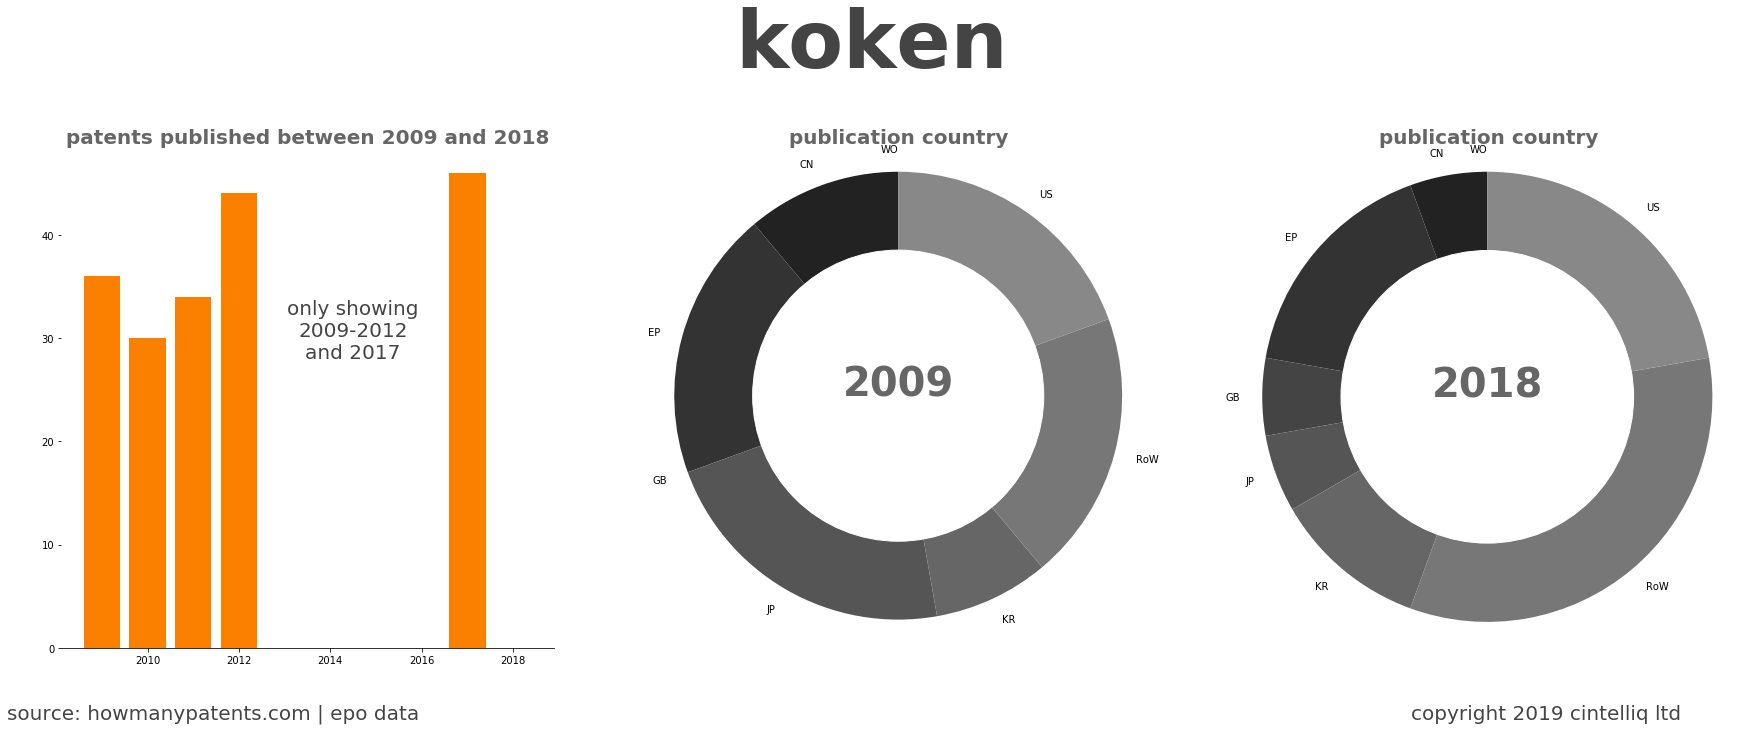 summary of patents for Koken